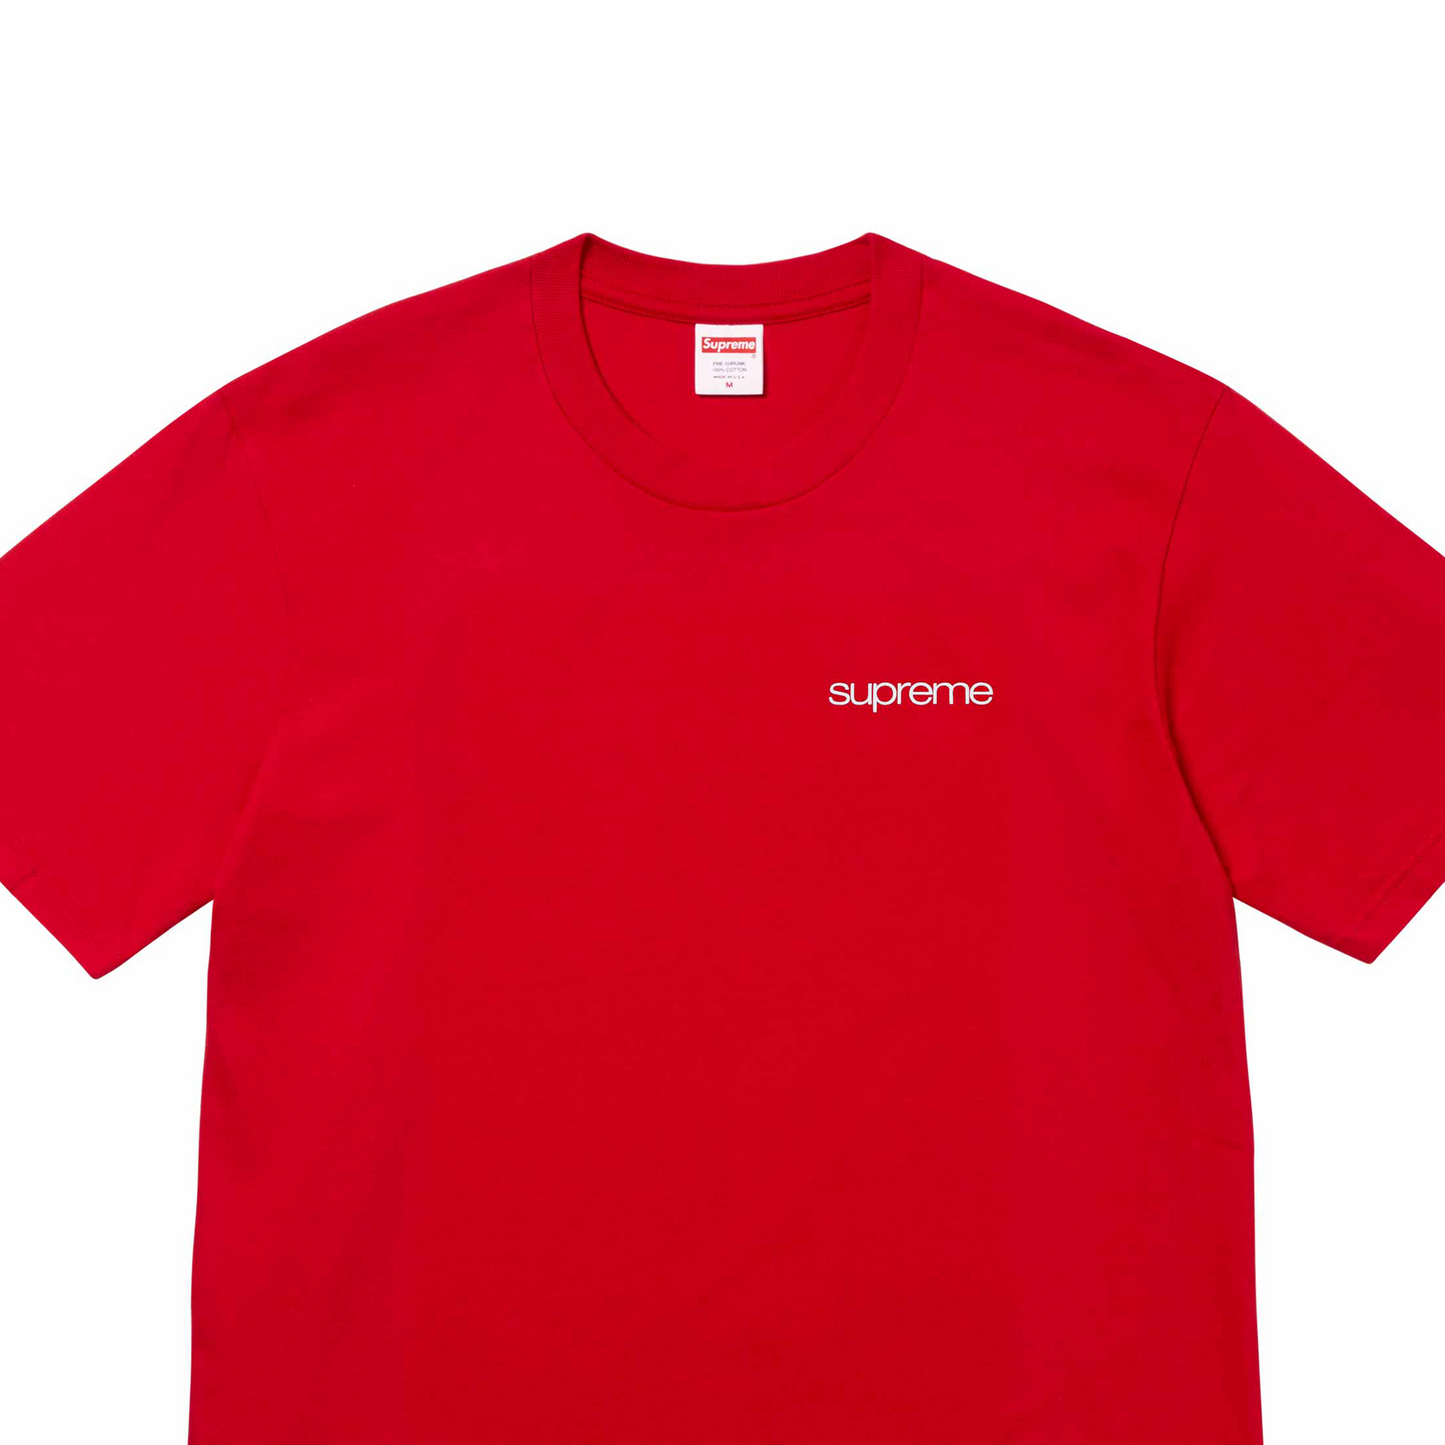 Supreme NYC Tee Red (FW23)